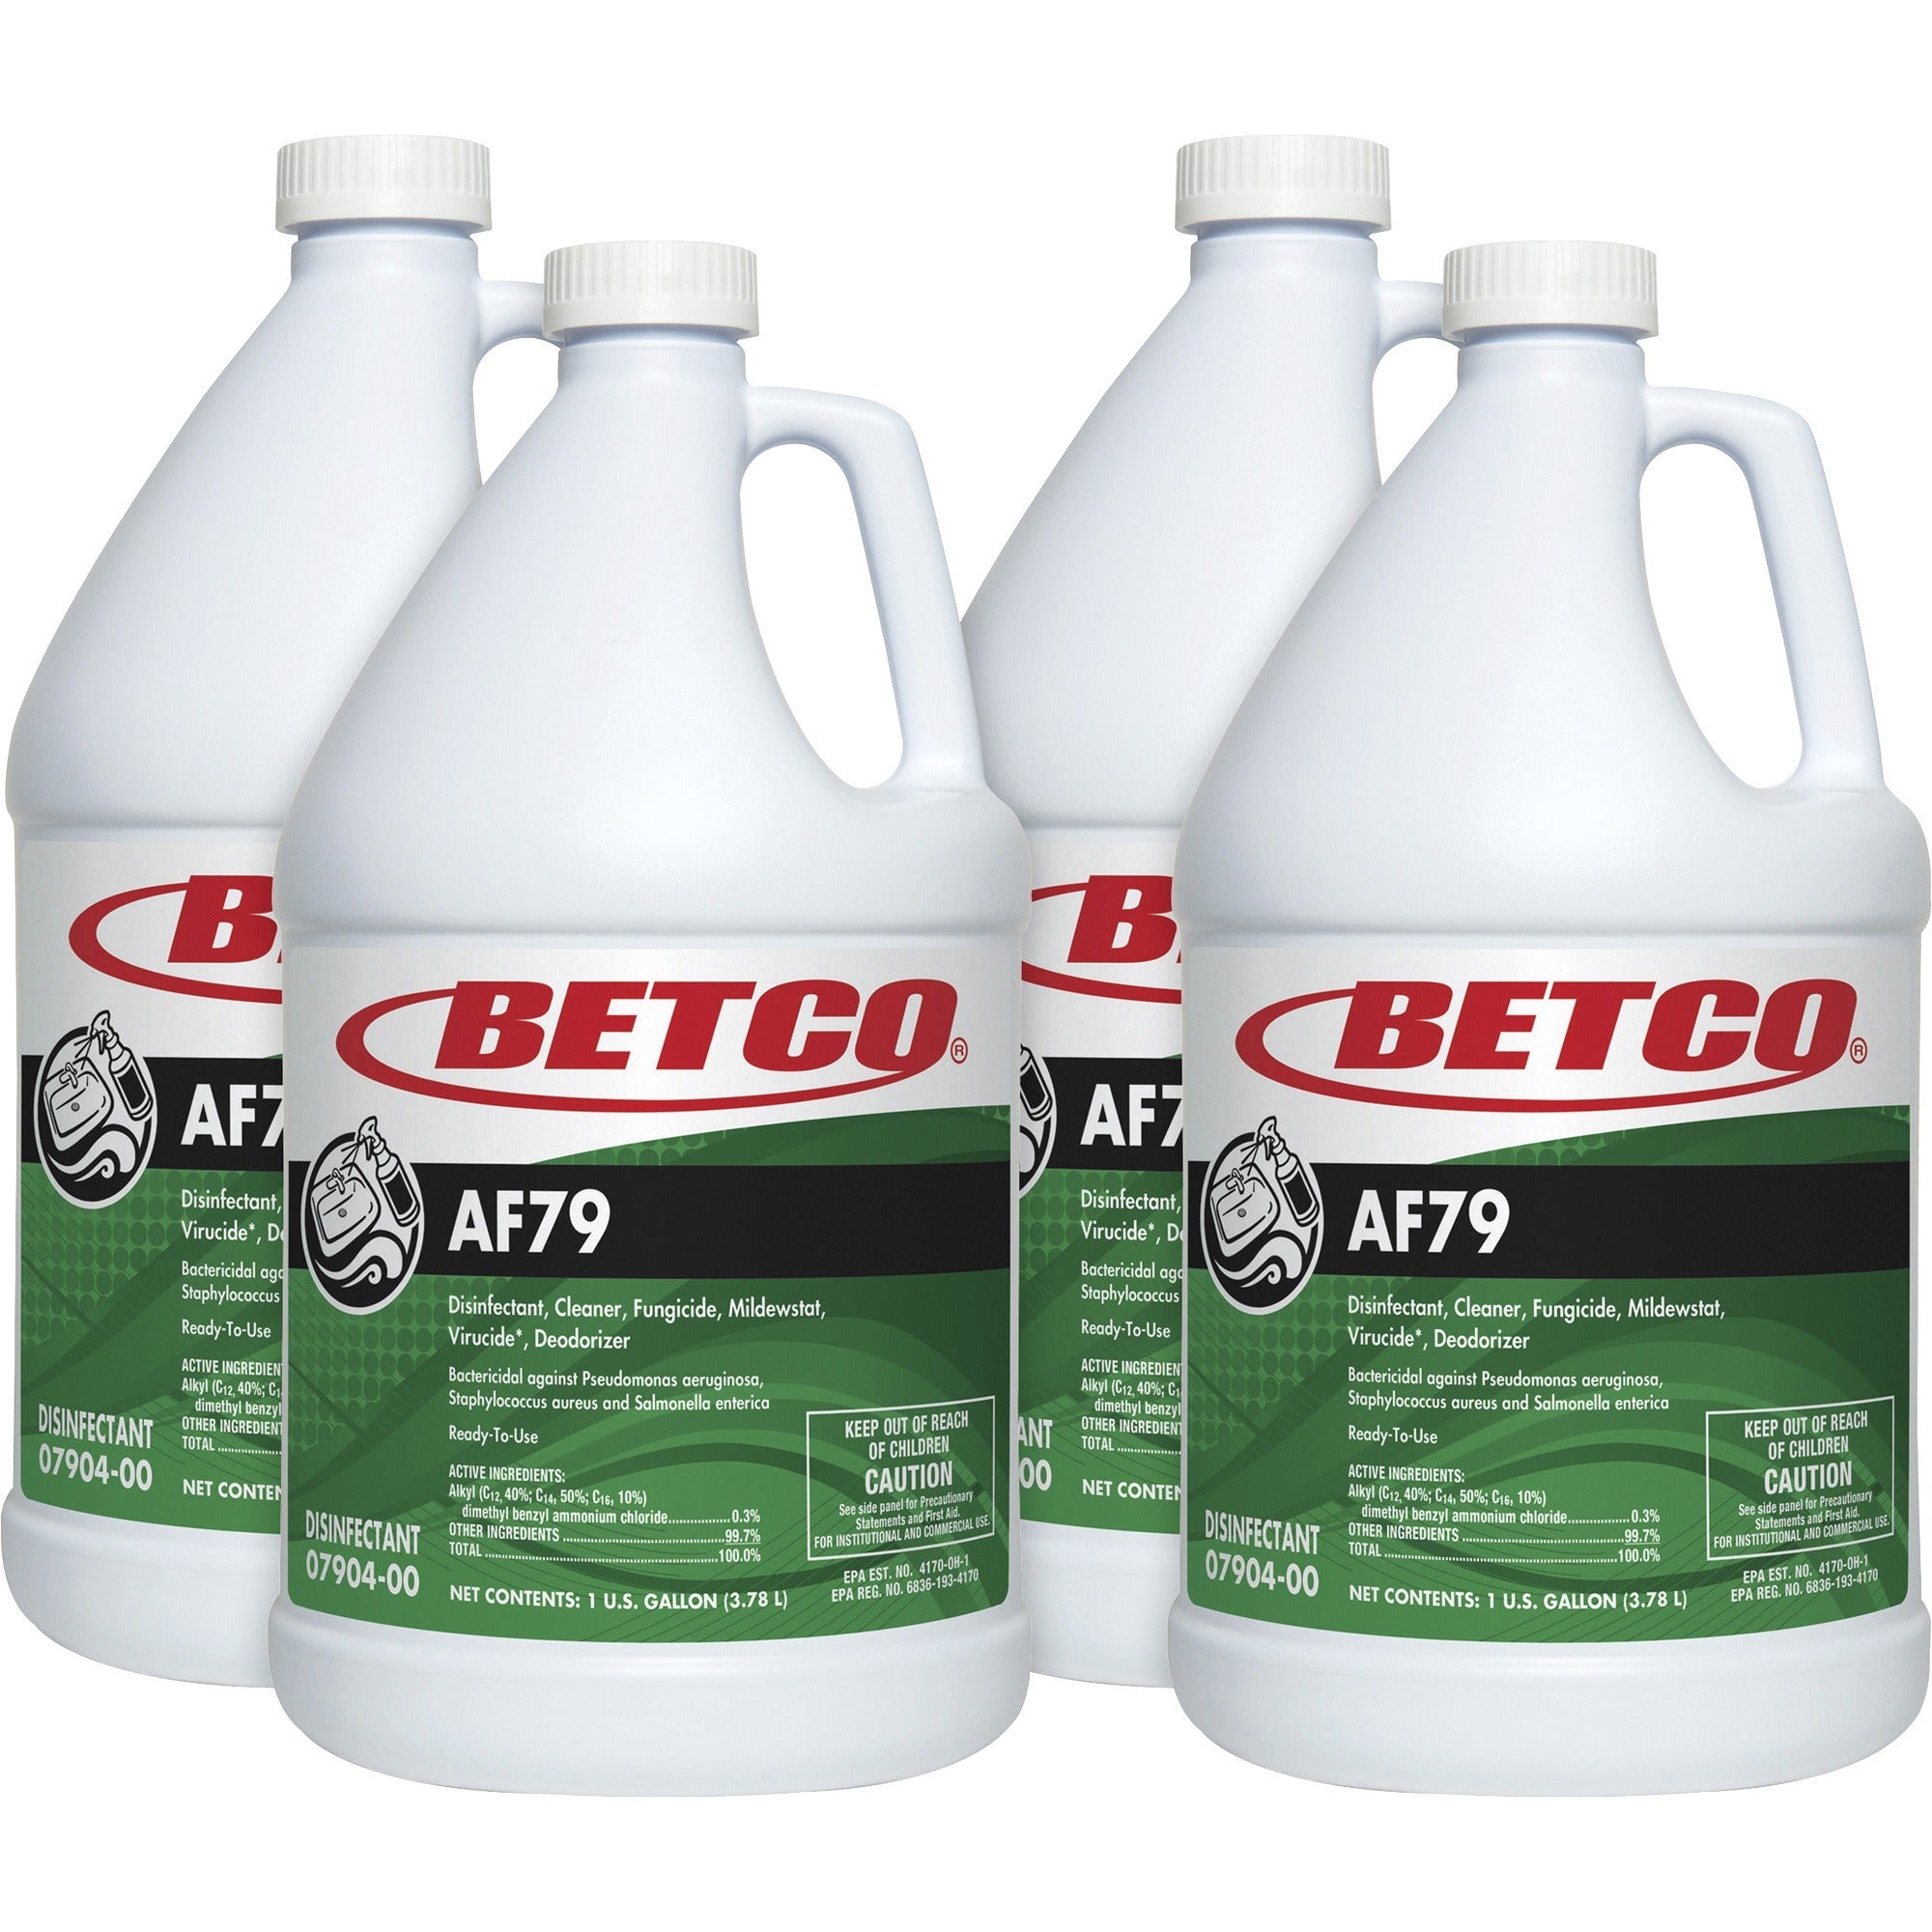 Betco AF79 Acid-Free Restroom Cleaner - Ready-To-Use - 128 fl oz (4 quart) - Citrus Bouquet Scent - 4 / Carton - Disinfectant, Deodorize, Long Lasting, Rinse-free - Clear Blue - 1